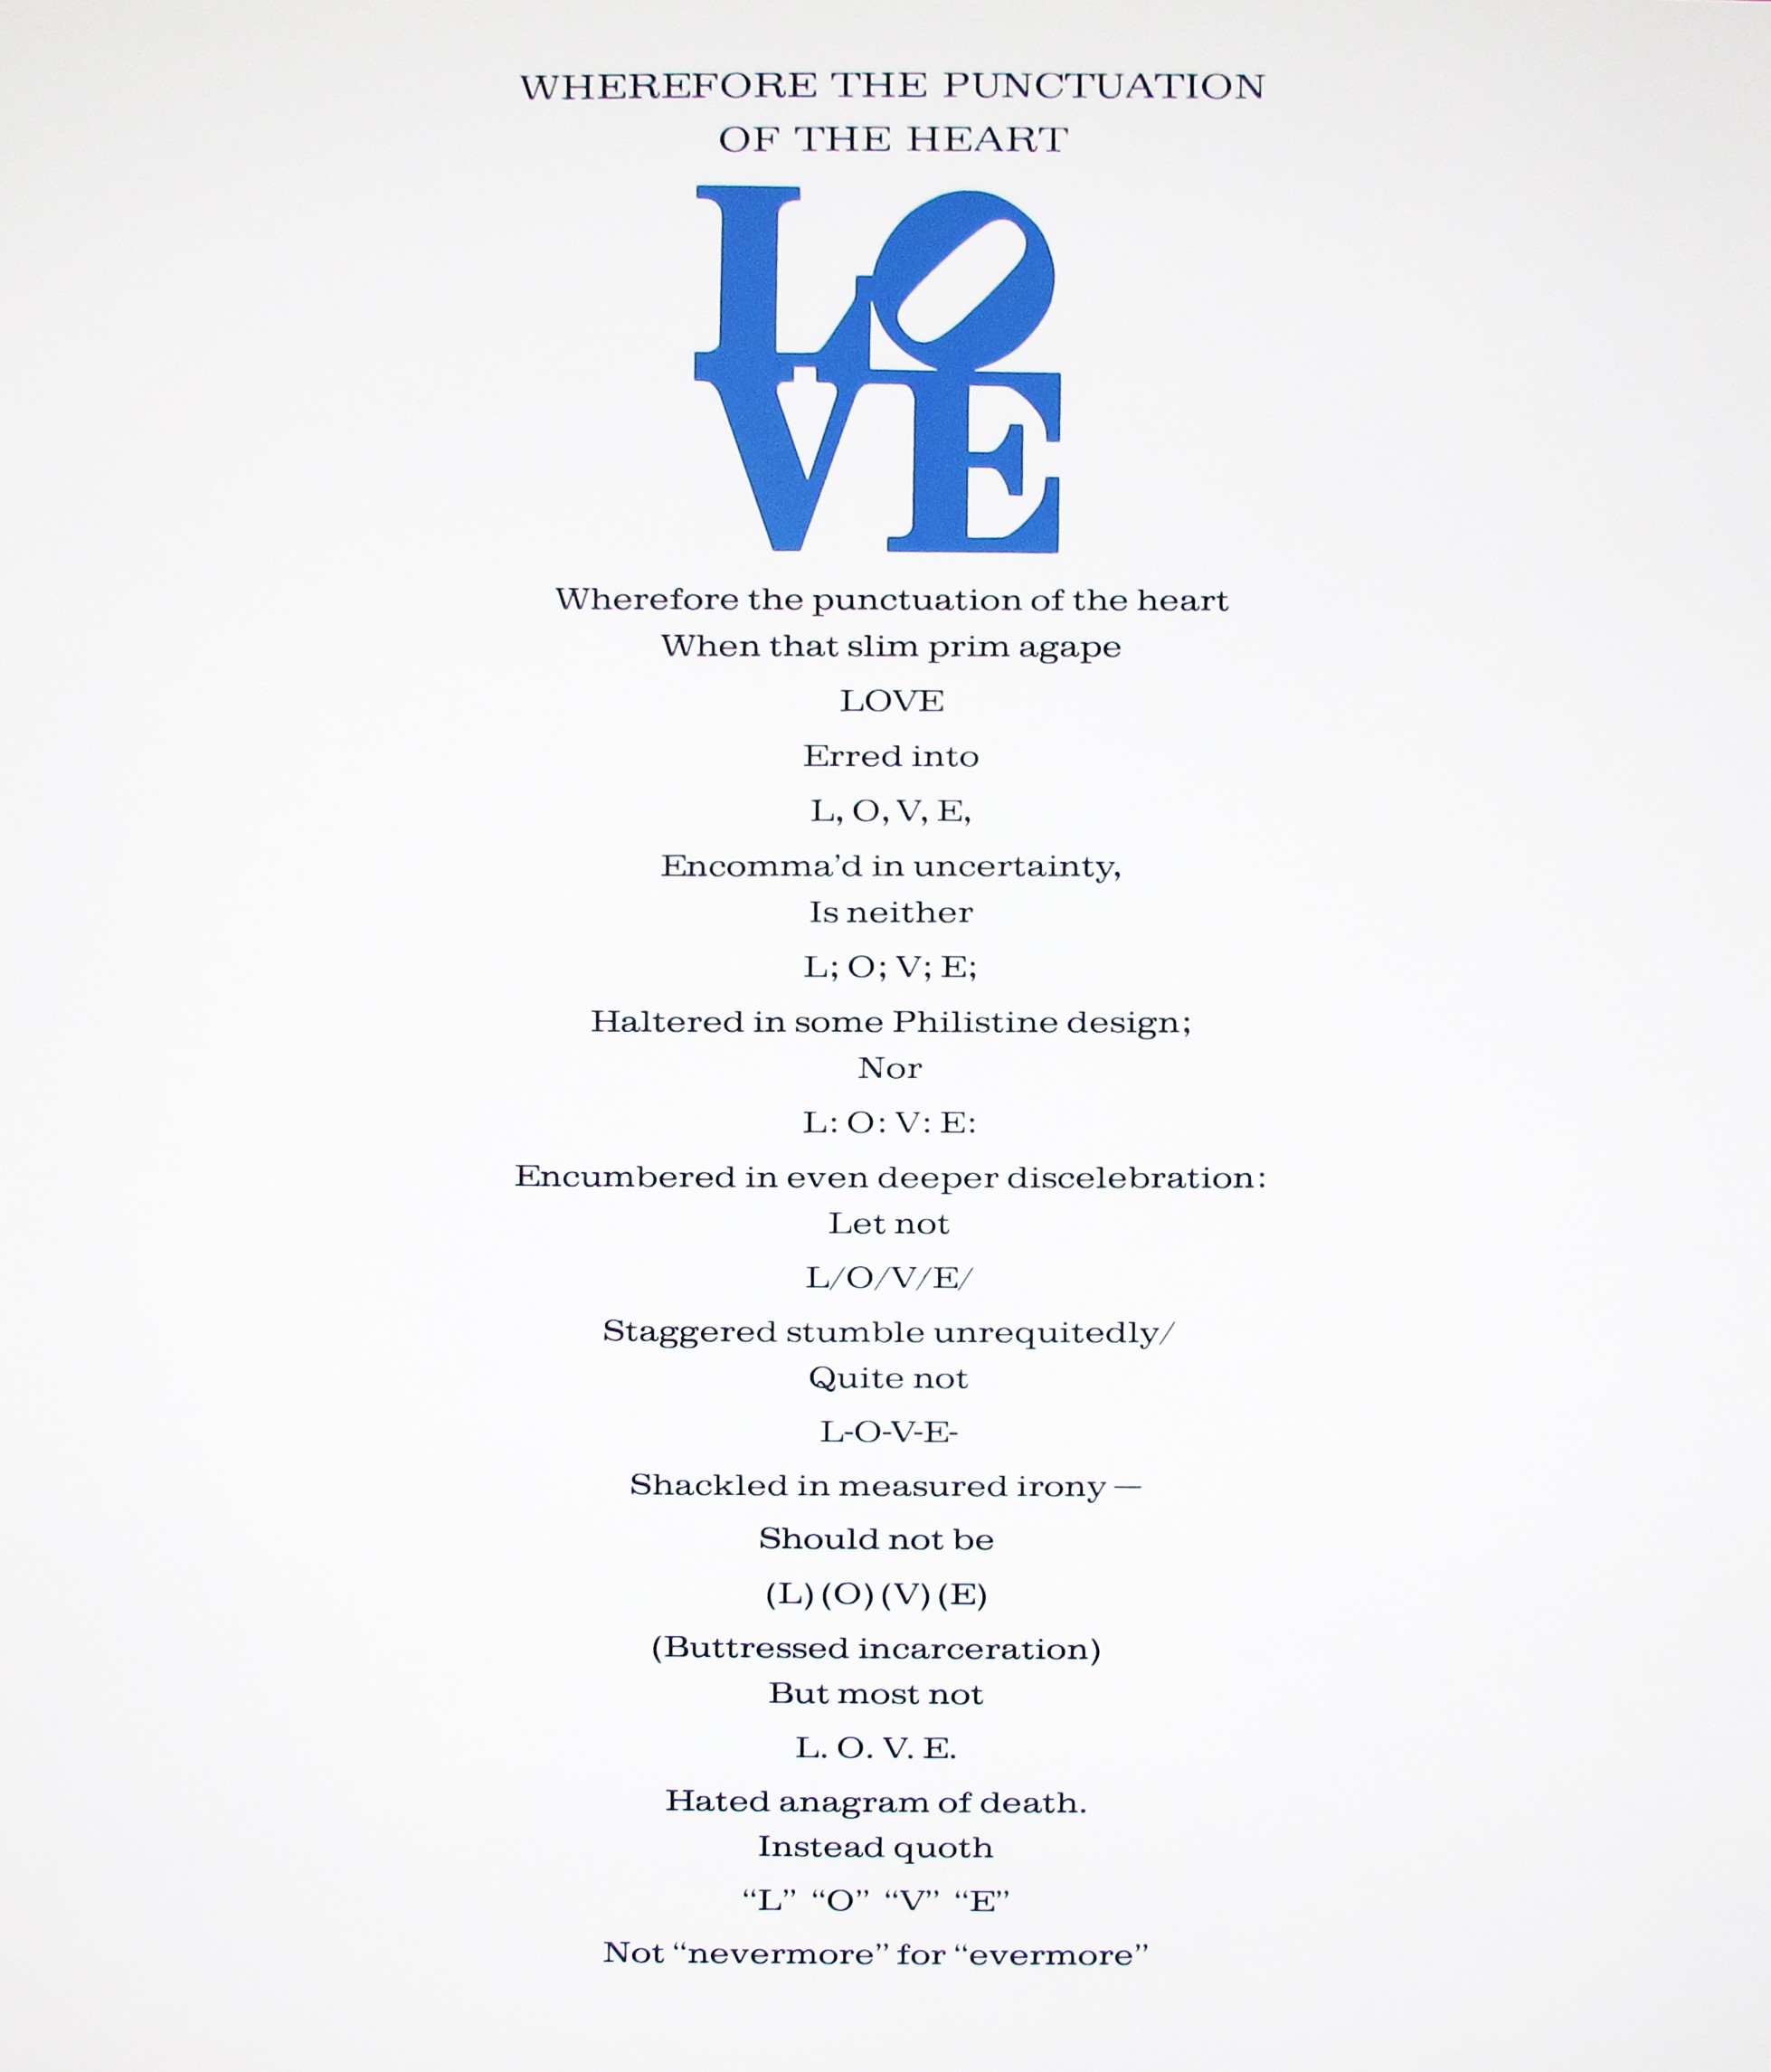 Robert Indiana | The Book of Love Poem | Wherefore the Punctuation of the Heart | 1996 | Image of Artists' work.